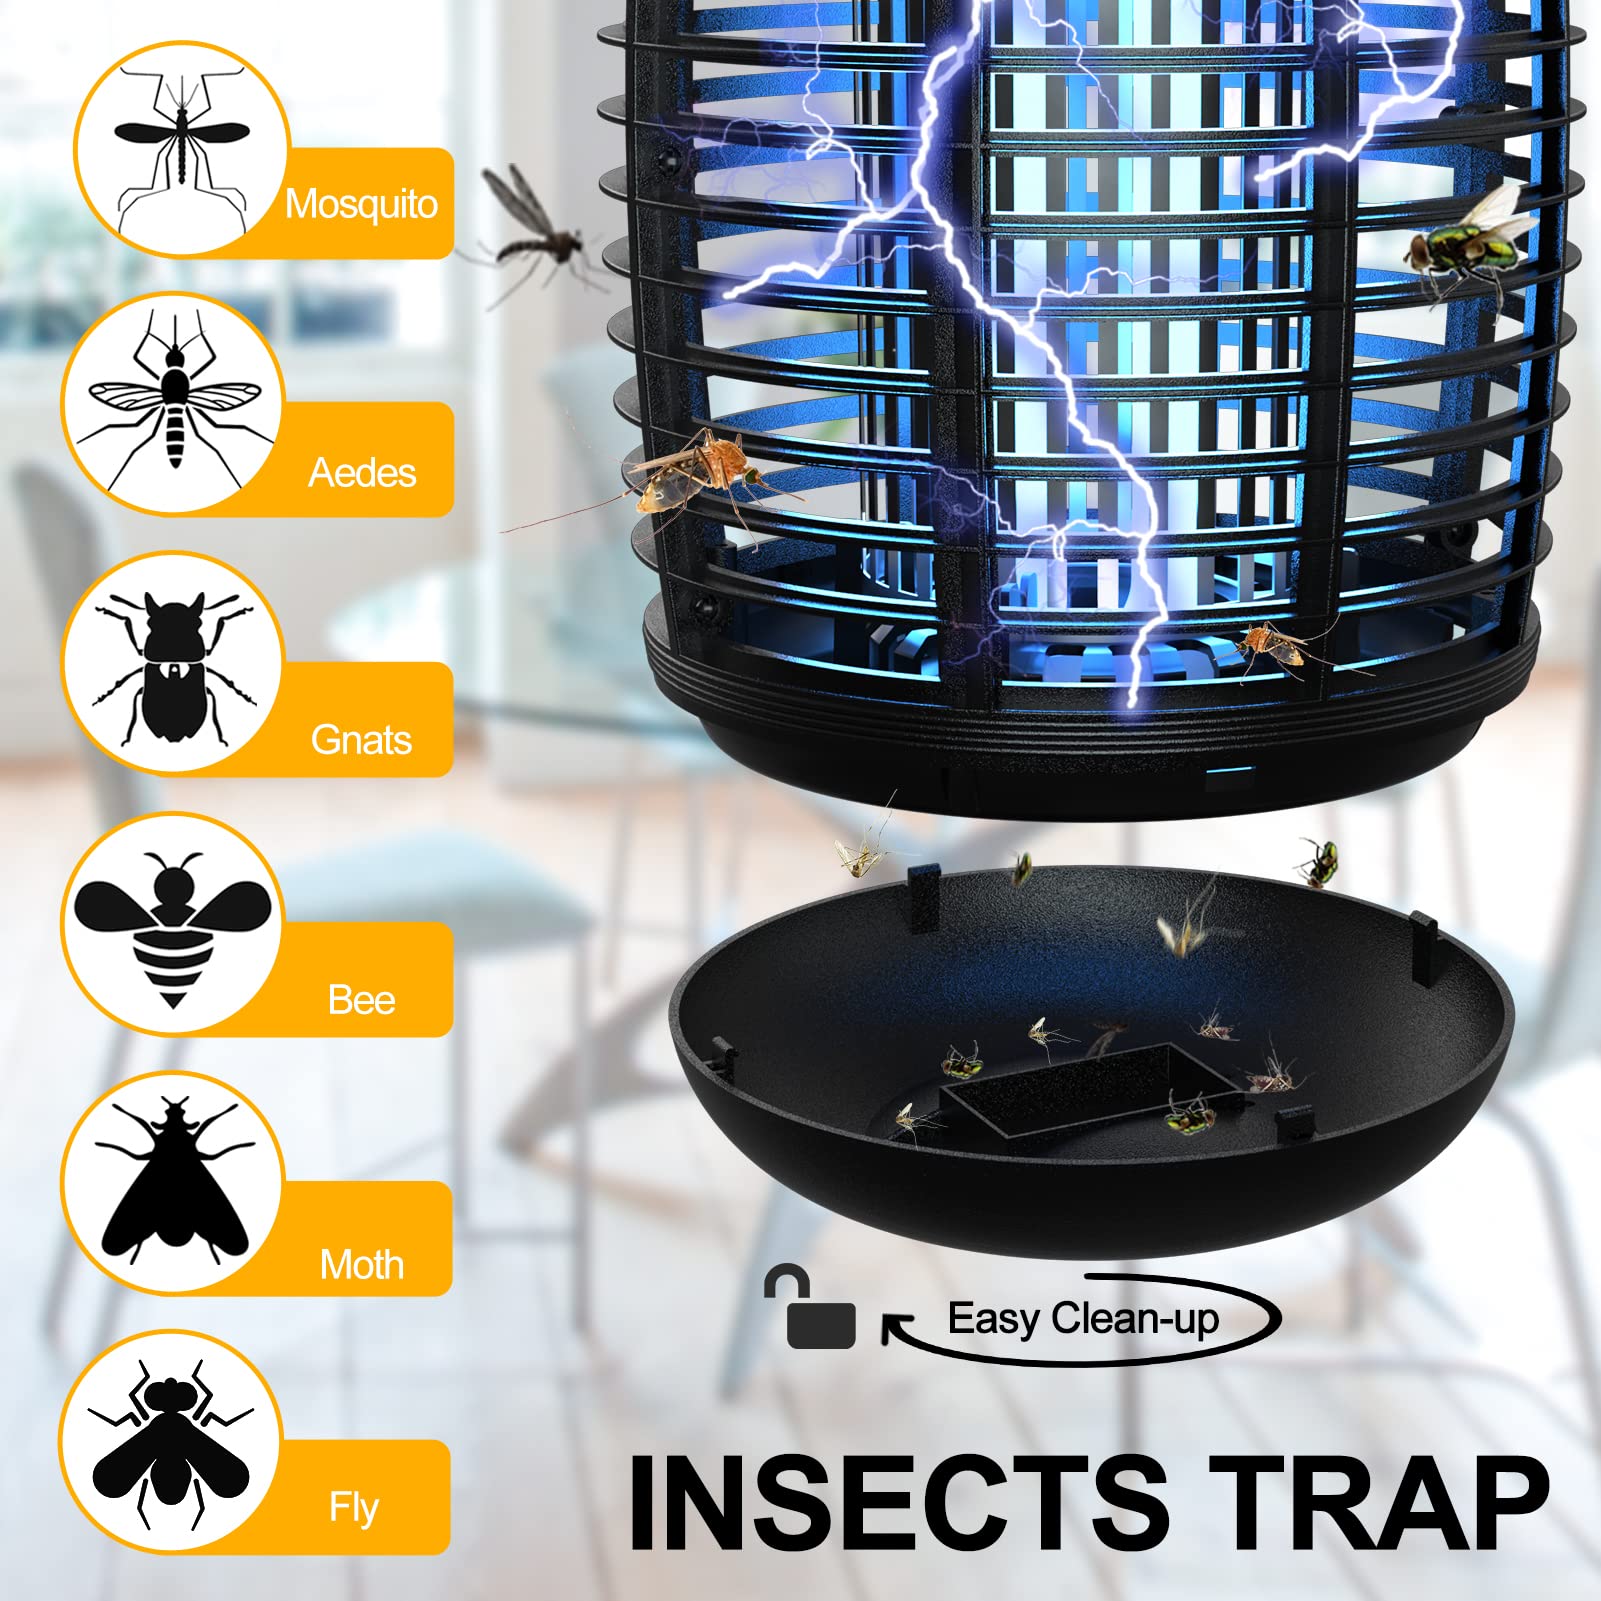 Bug Zapper with Light Sensor, Mosquito Zapper Outdoor 4200V Electric Insect Killer, Waterproof Mosquito Killer, Fly Zapper, Fly Trap for Home Backyard Garden Patio, Mosquito Repellent Outdoor